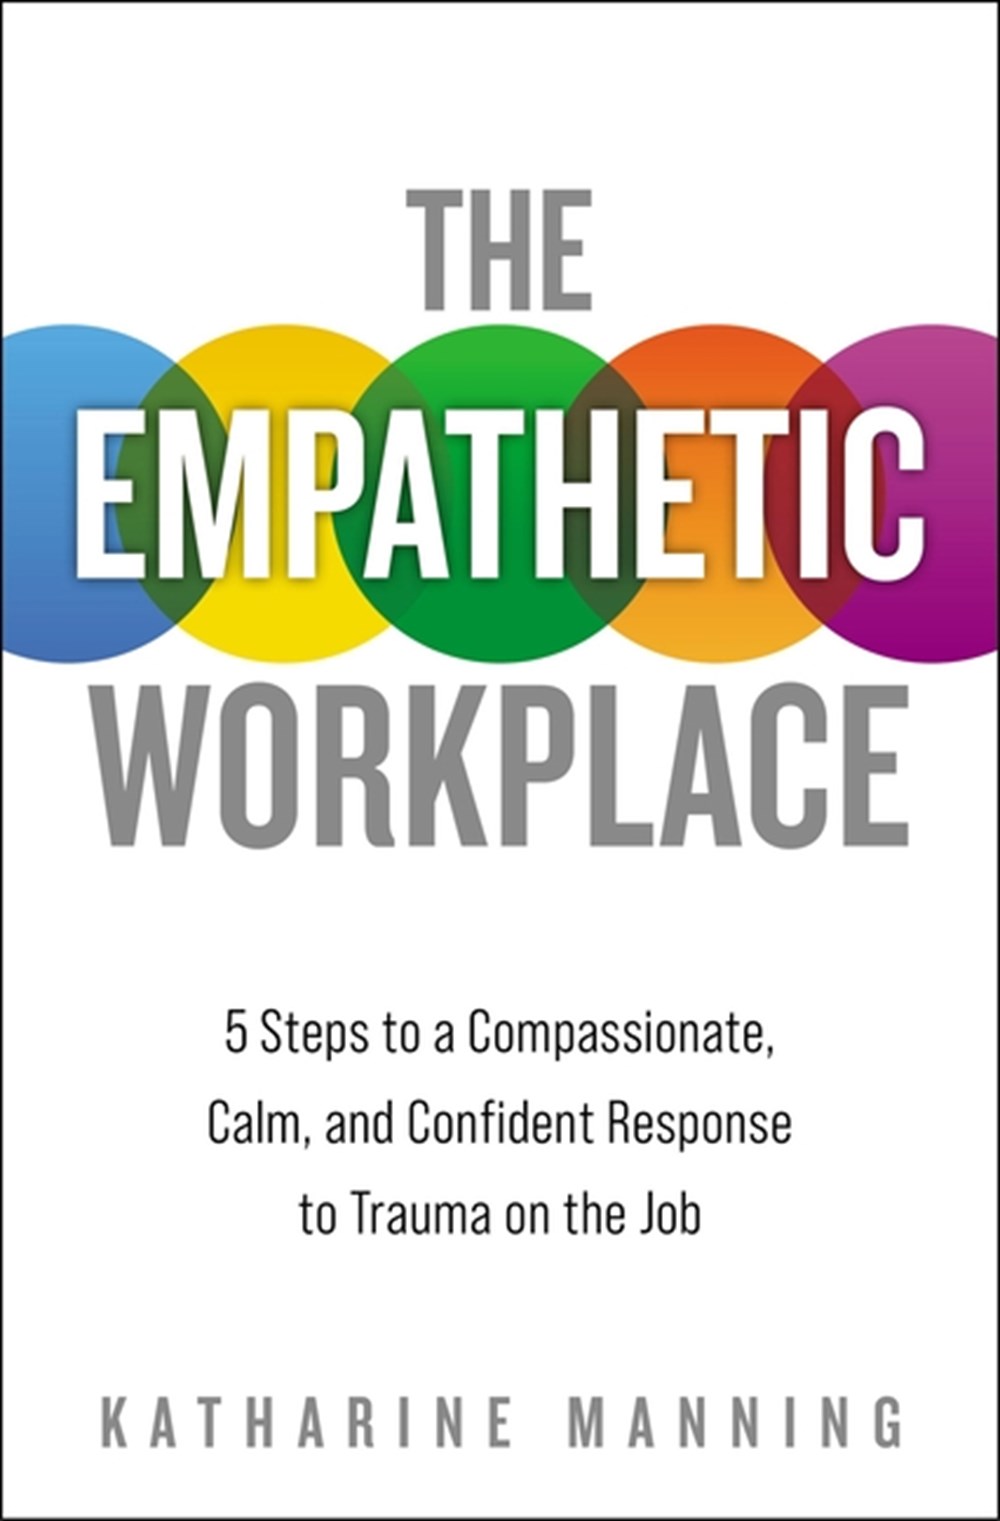 Empathetic Workplace: 5 Steps to a Compassionate, Calm, and Confident Response to Trauma on the Job